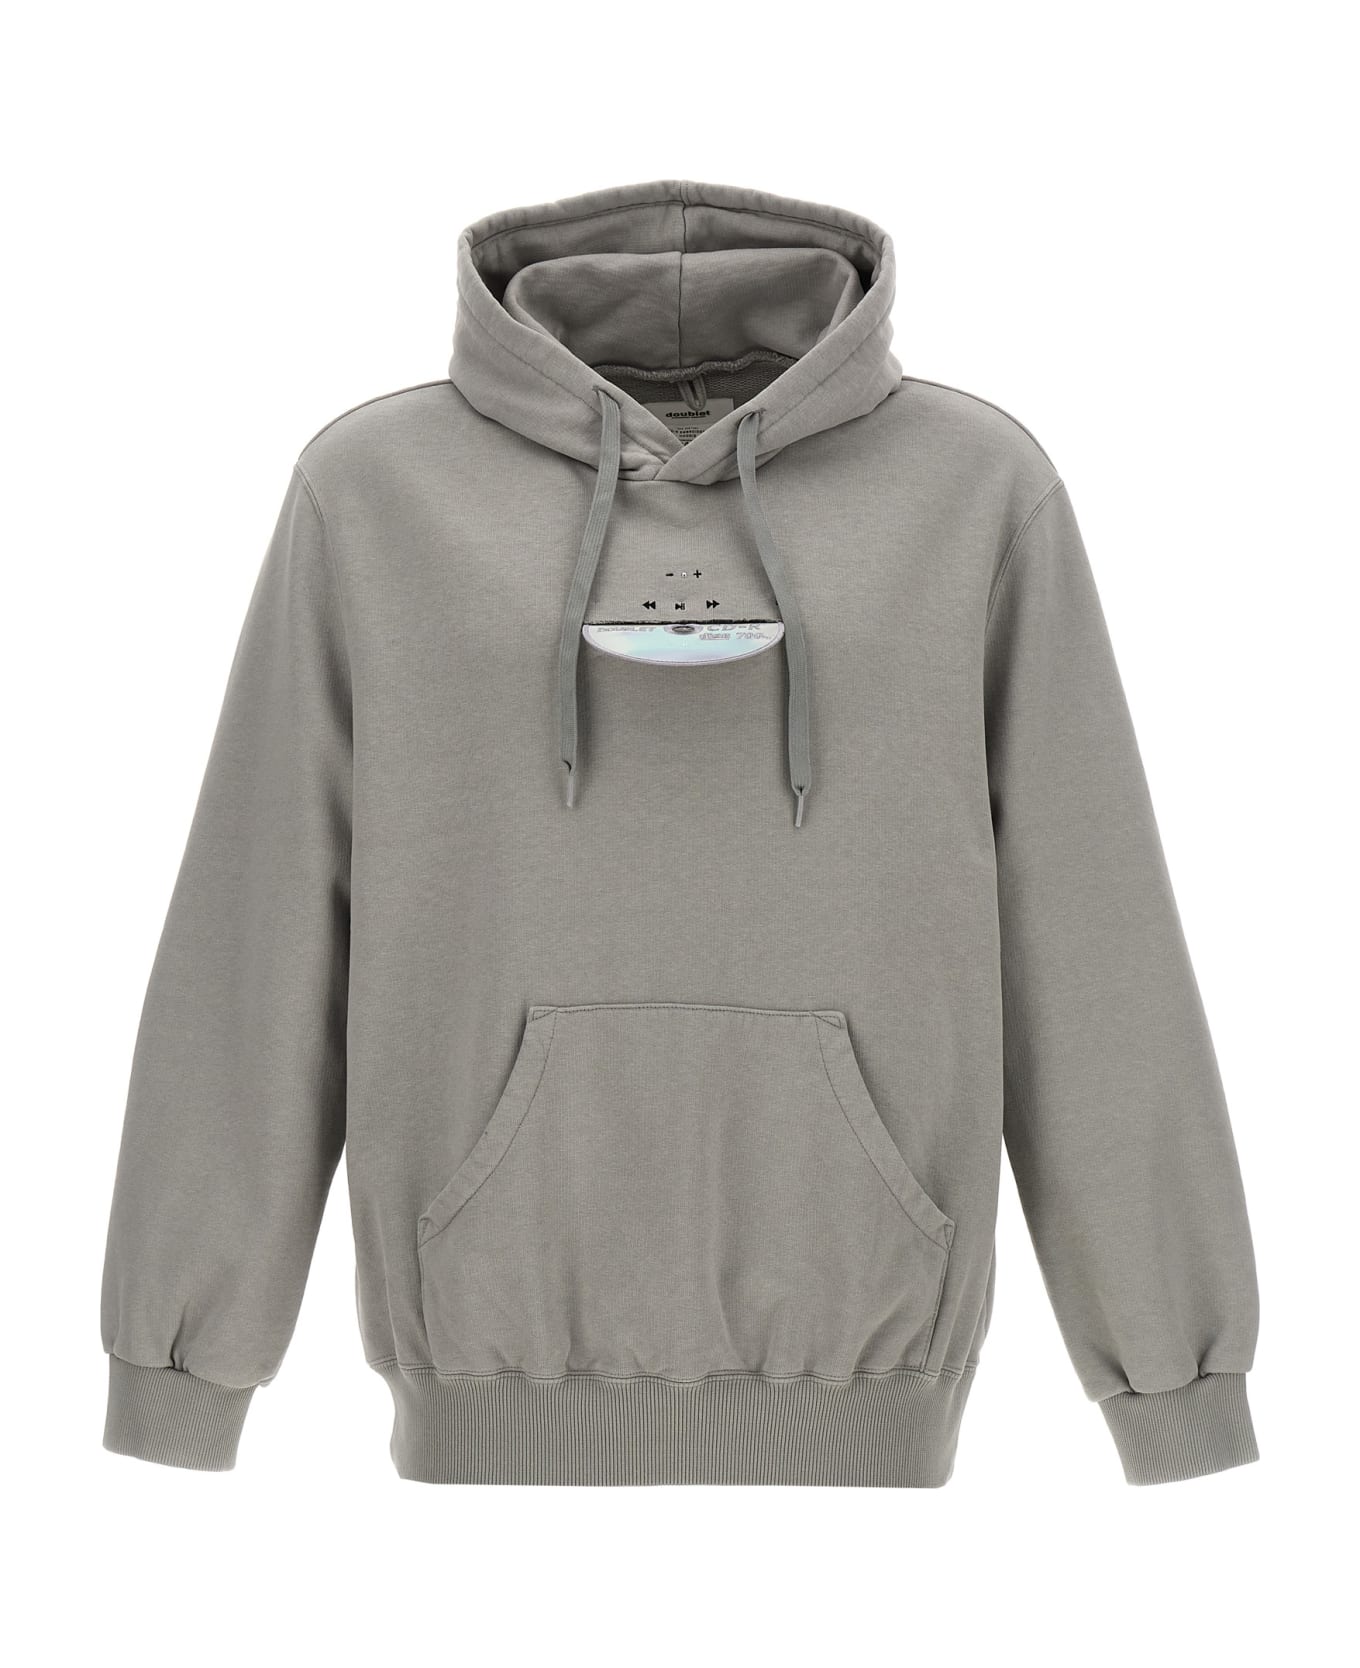 doublet 'cd-r Embroidery' Hoodie - Gray フリース